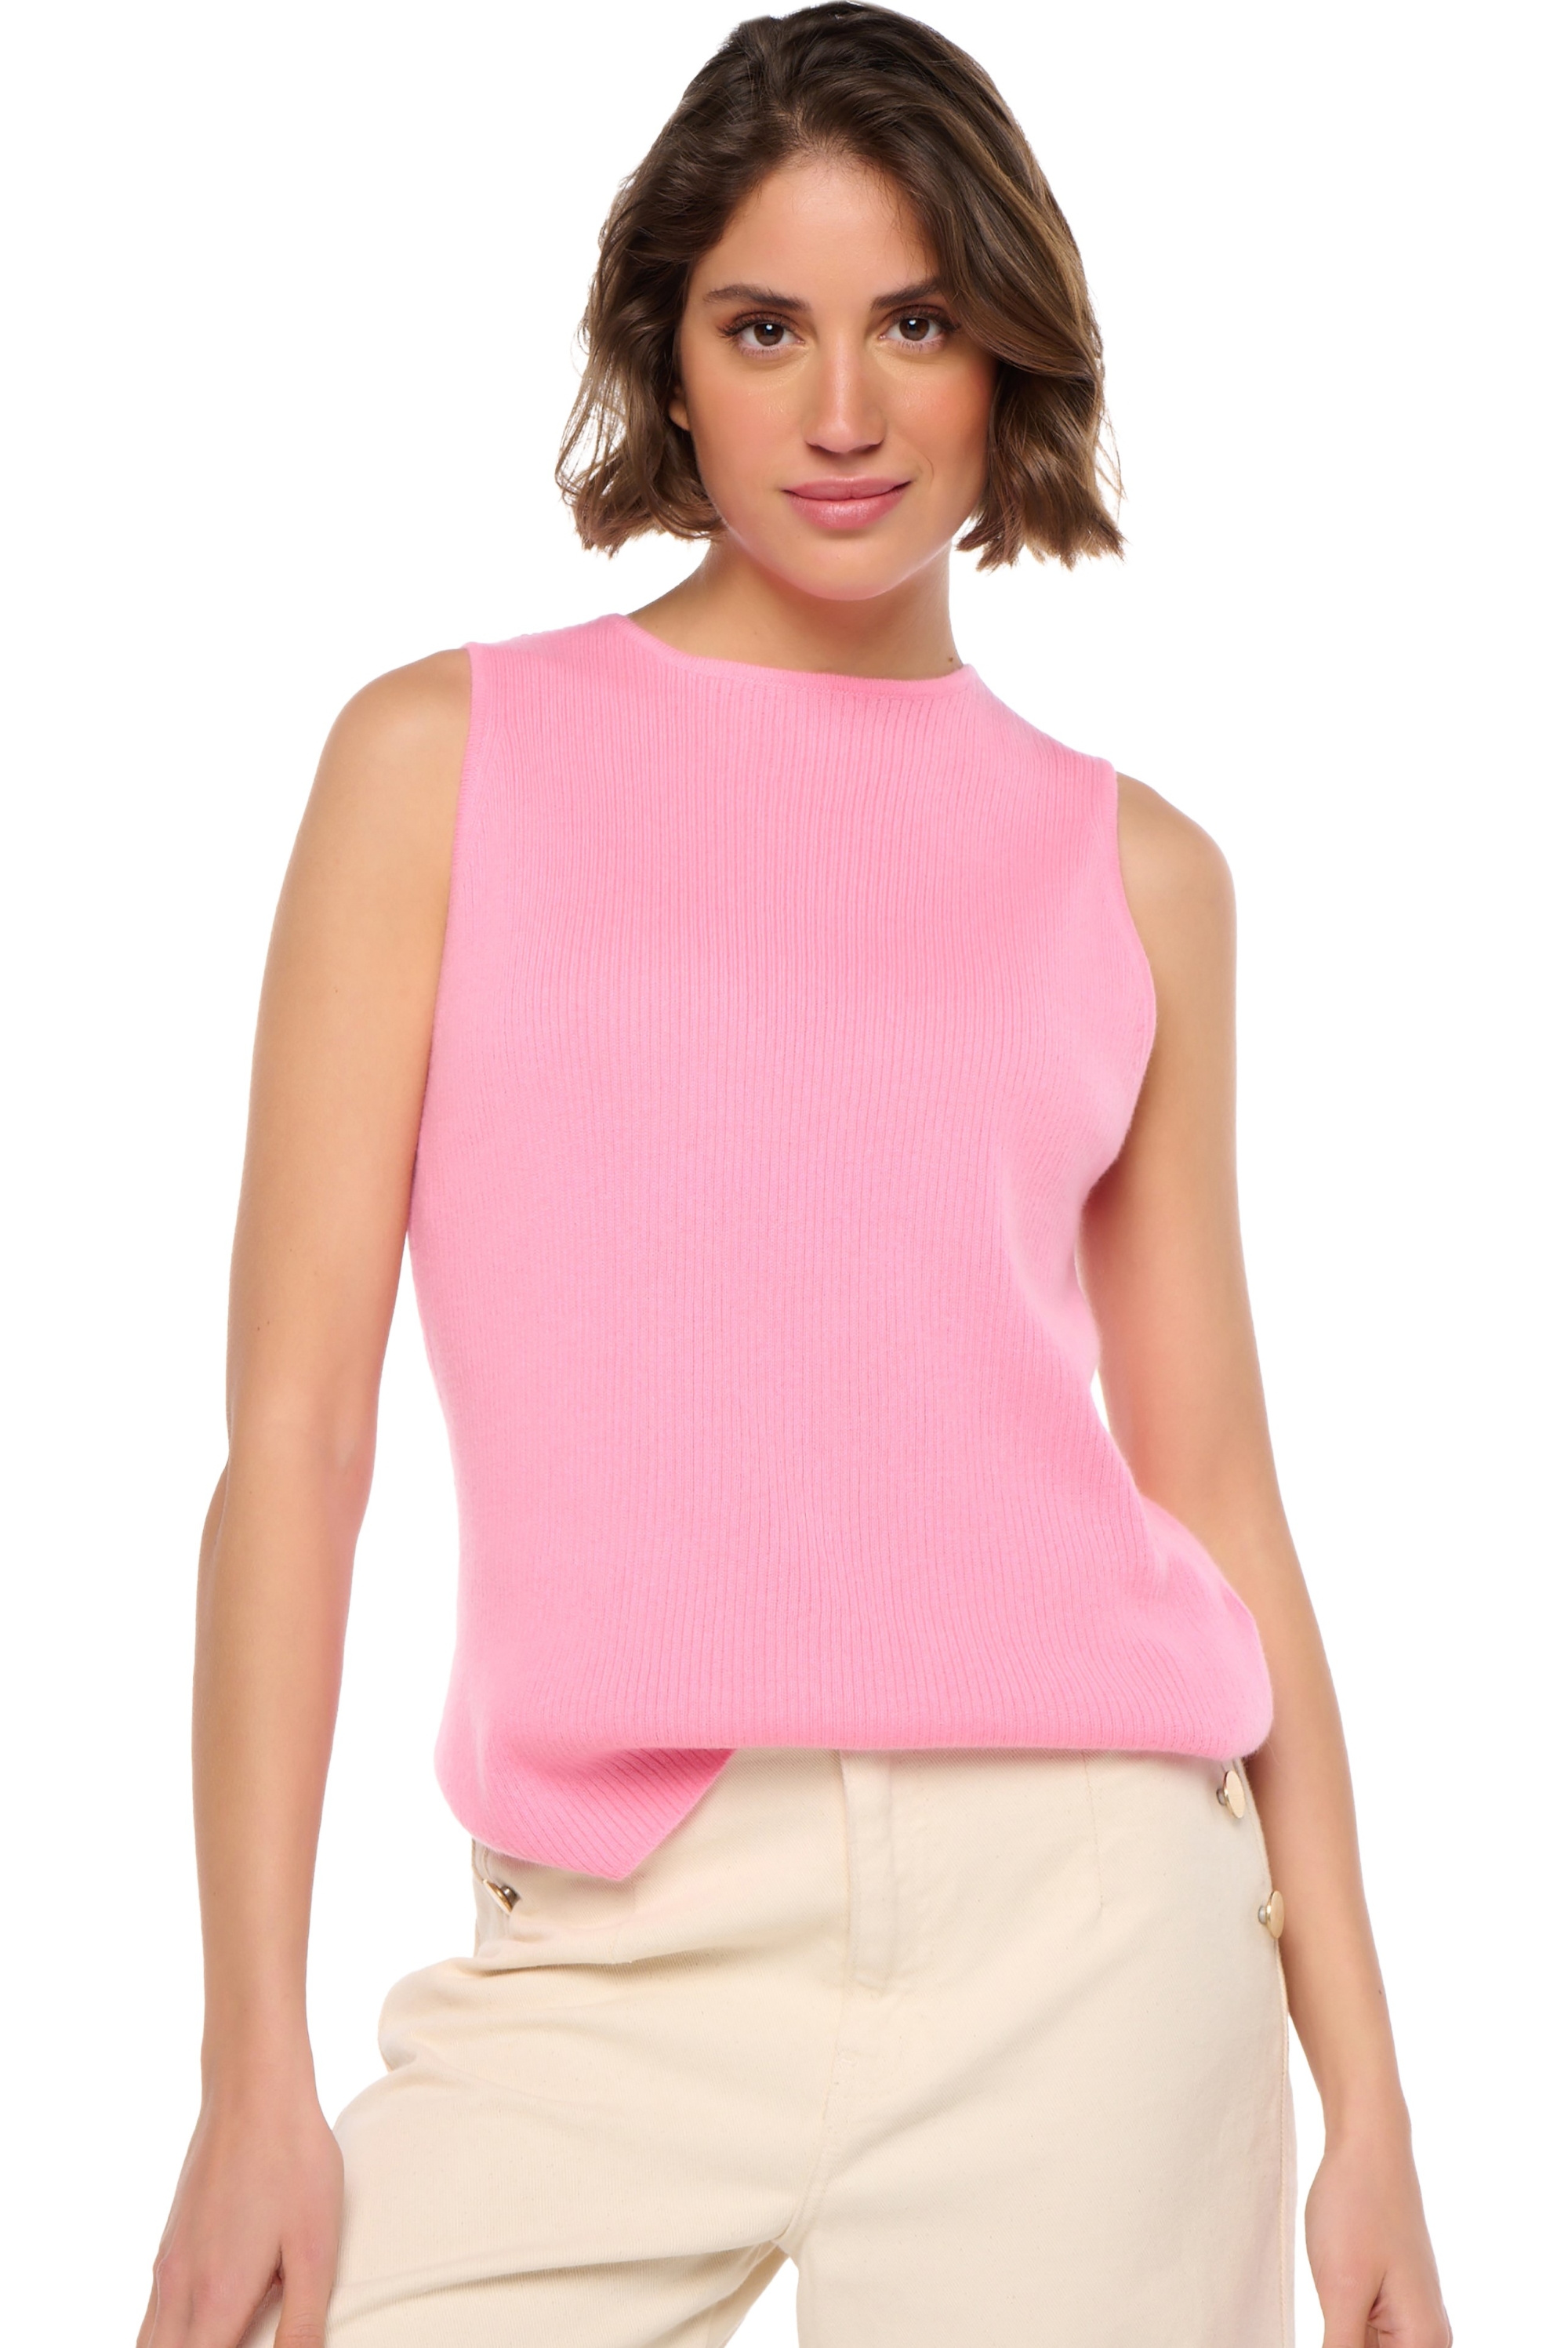 Cachemire pull femme soldes vuppia strawberry ice s